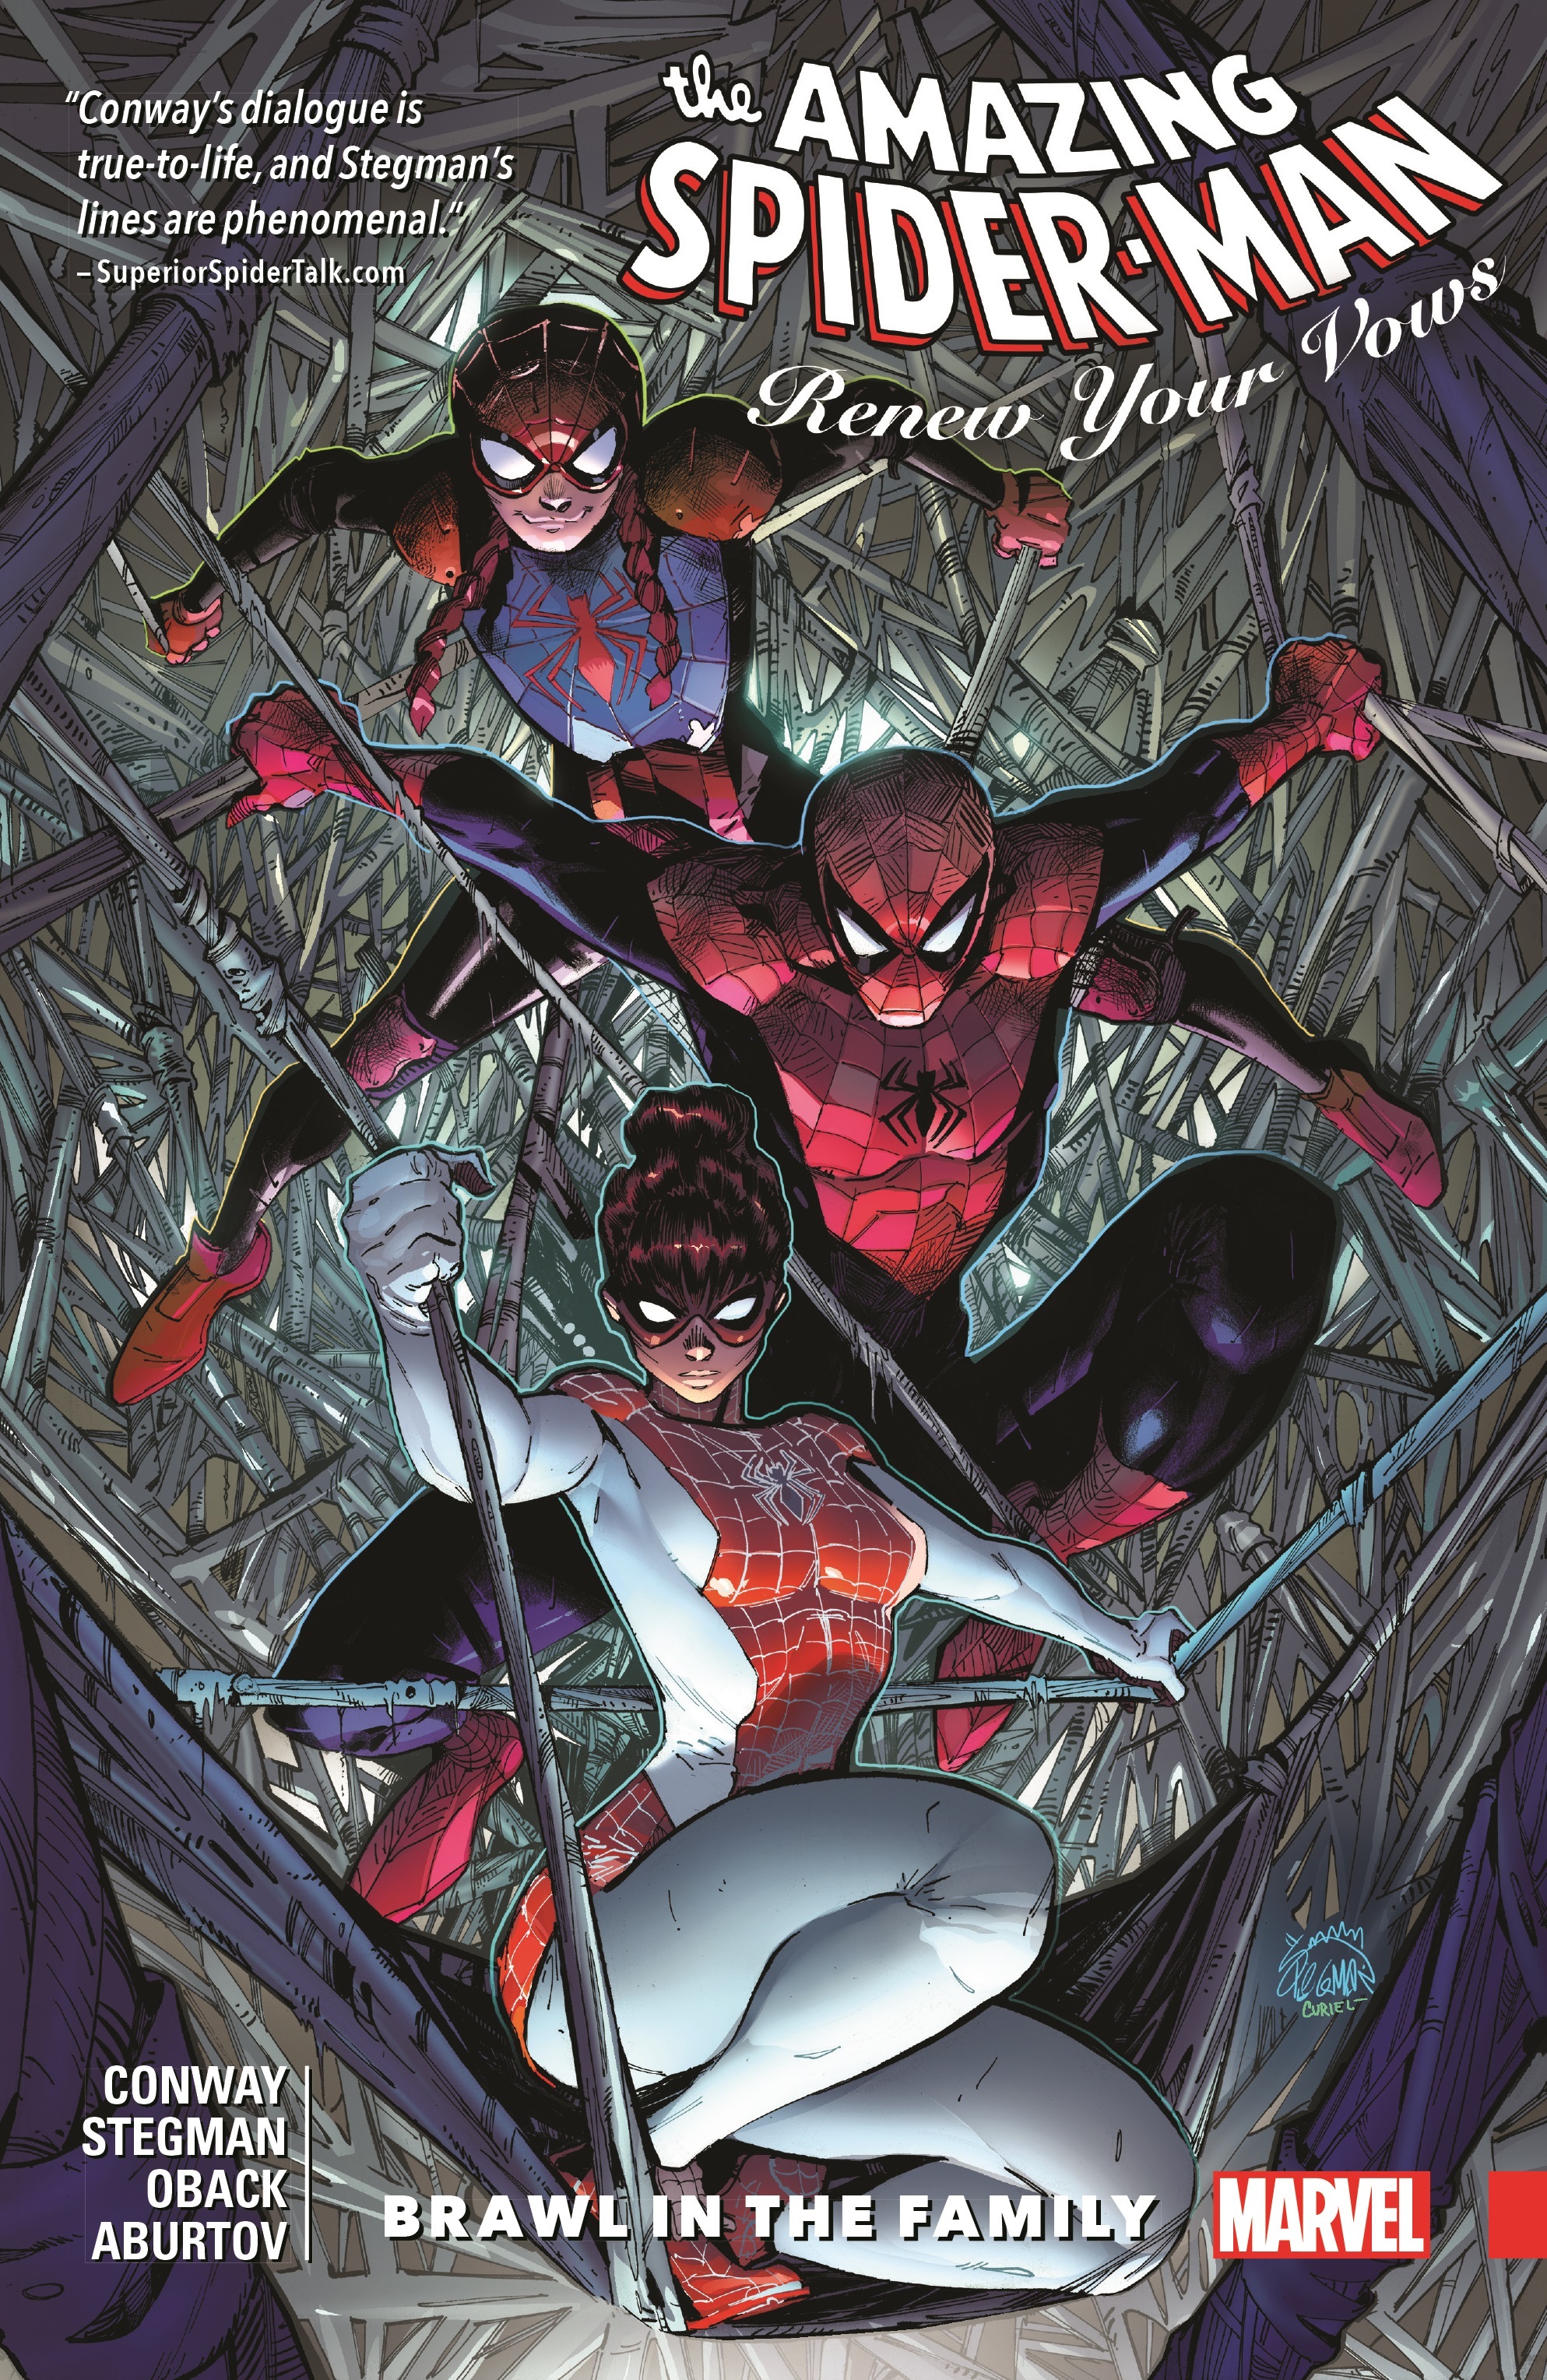 Amazing Spider-Man: Renew Your Vows Vol. 1: Brawl In The Family (Trade Paperback)